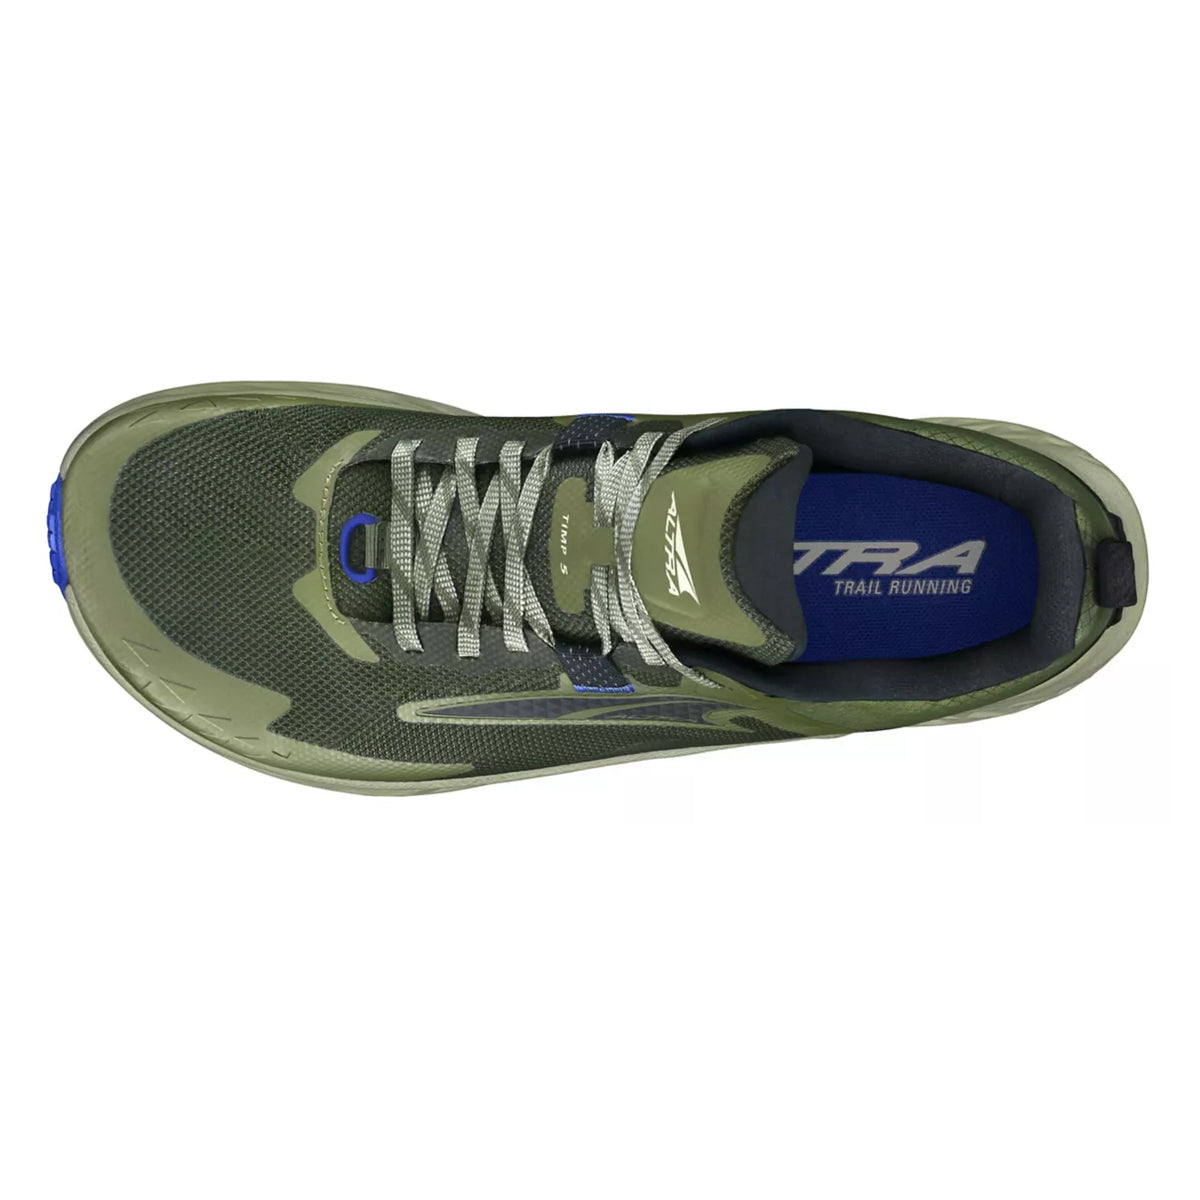 Altra Timp 5 in Dusty Olive by GOHUNT | Altra - GOHUNT Shop